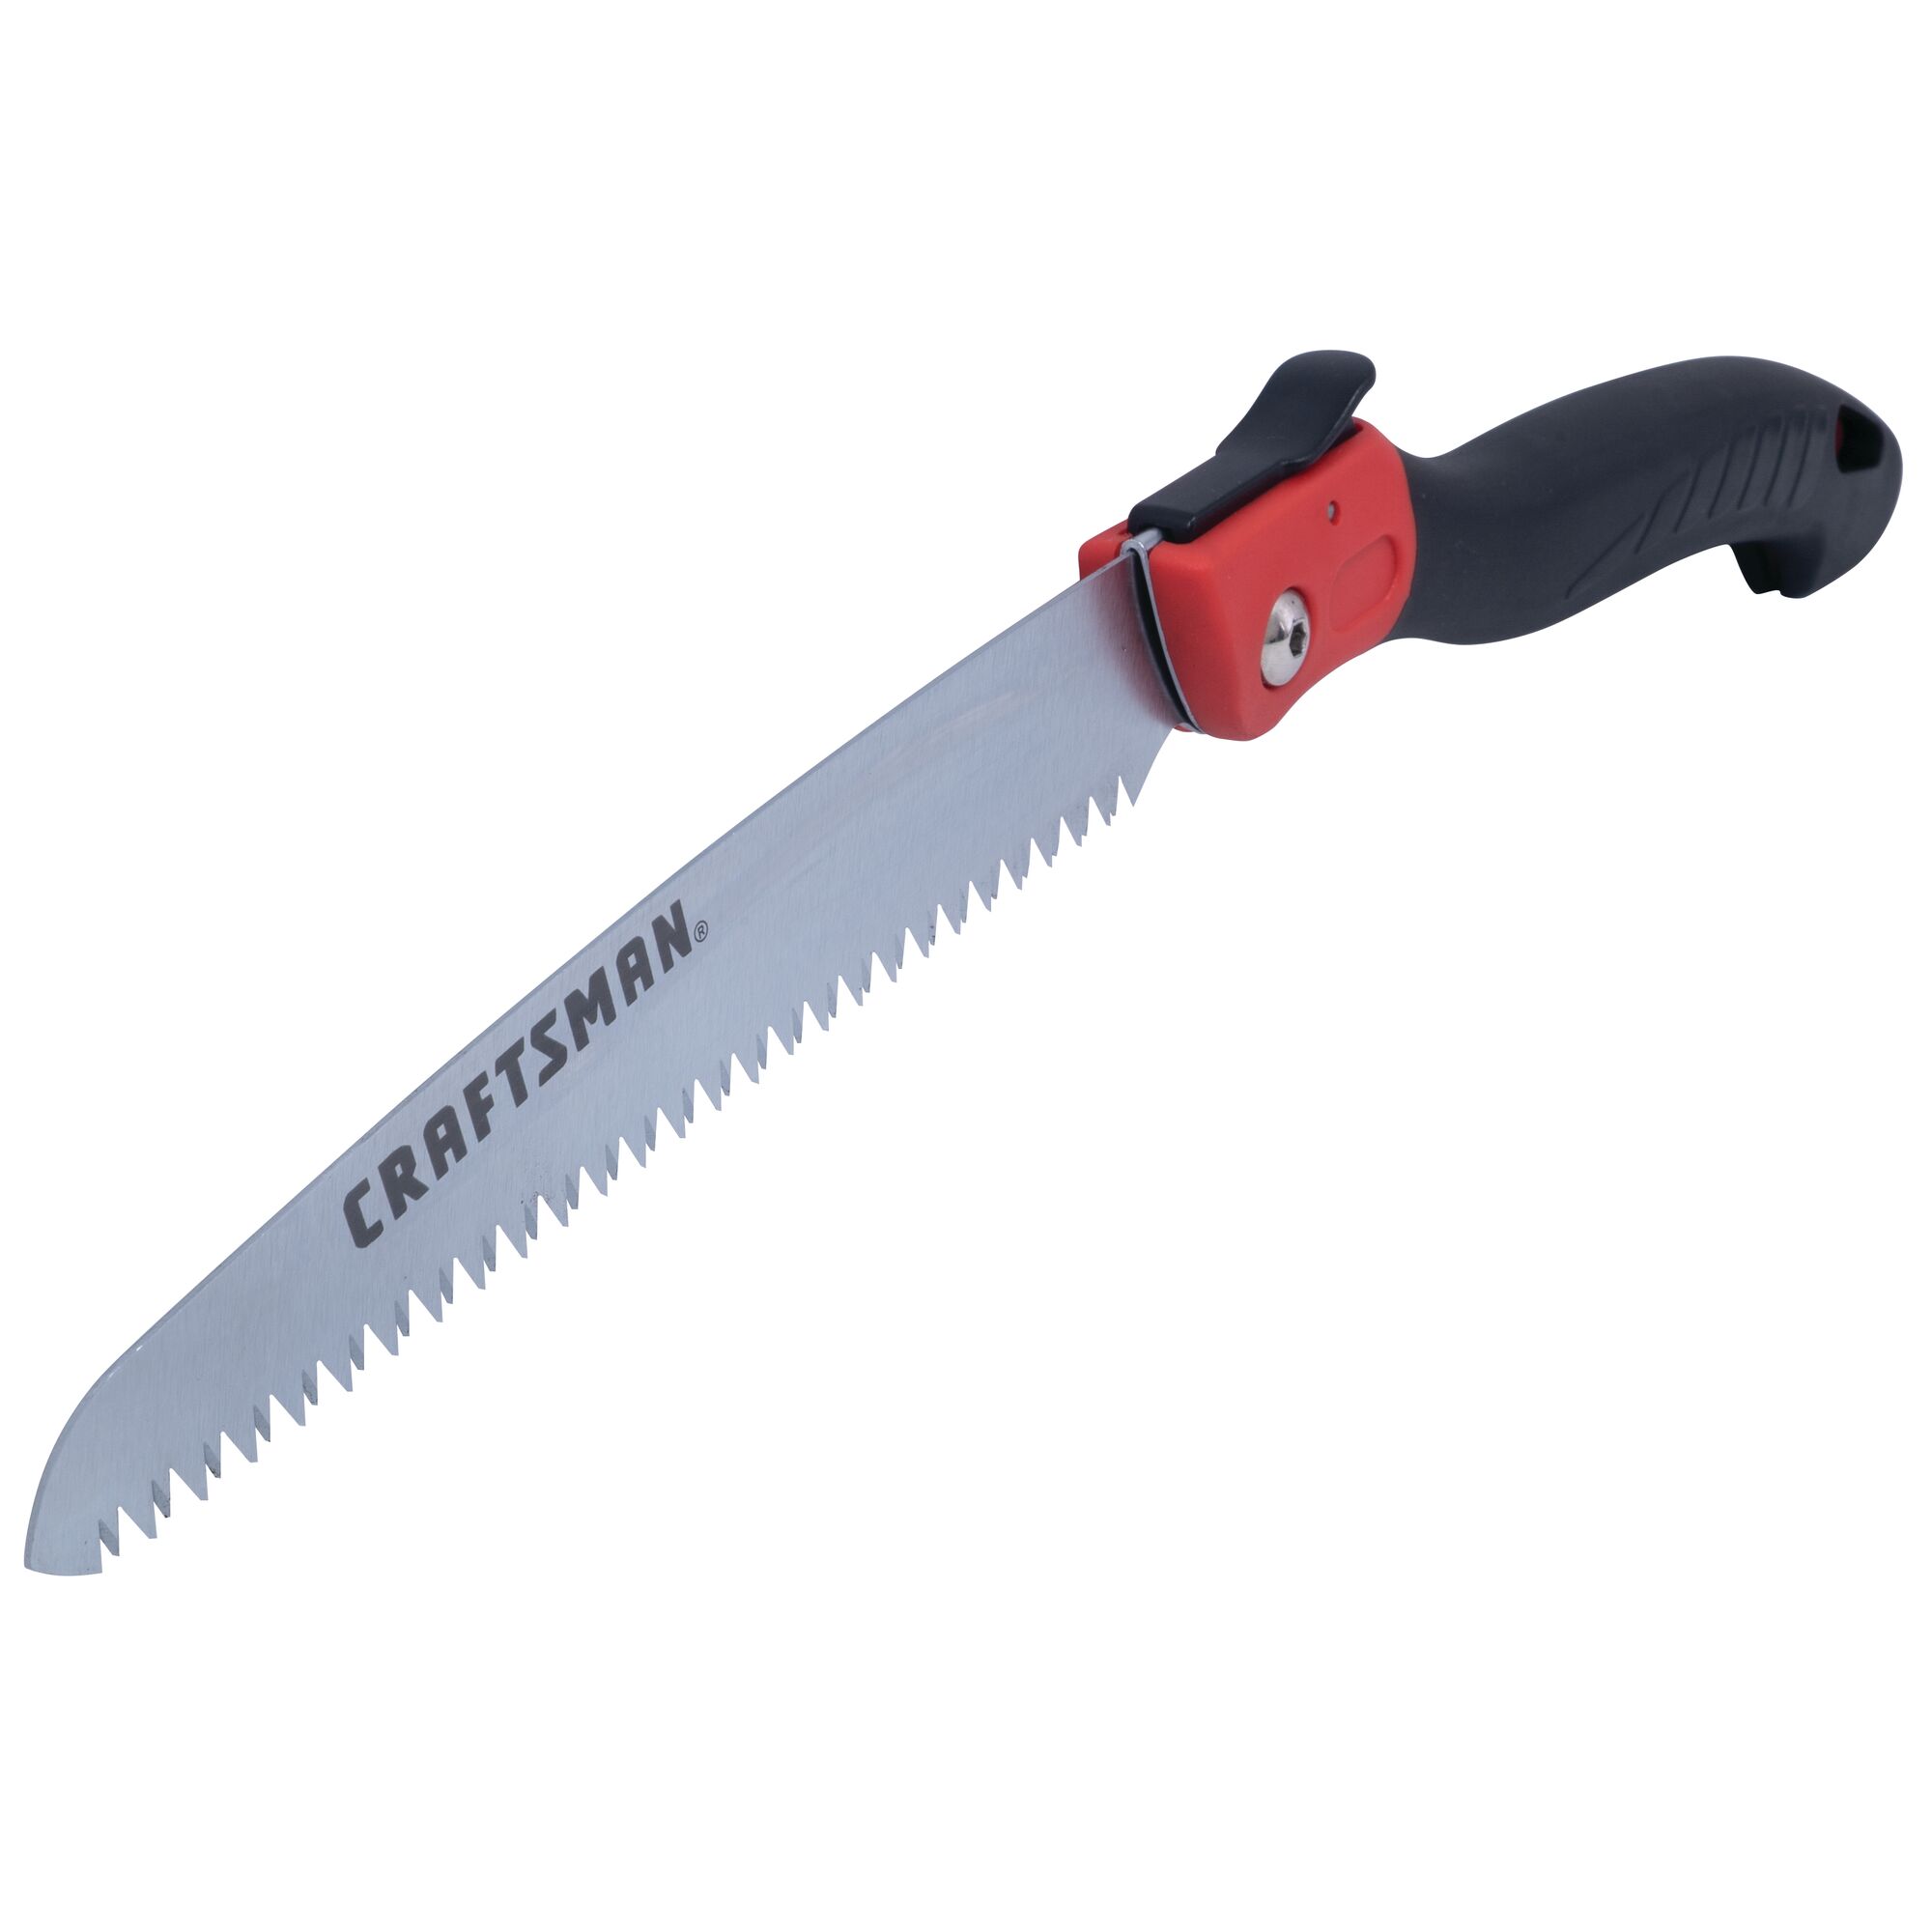 Right profile of folding saw.